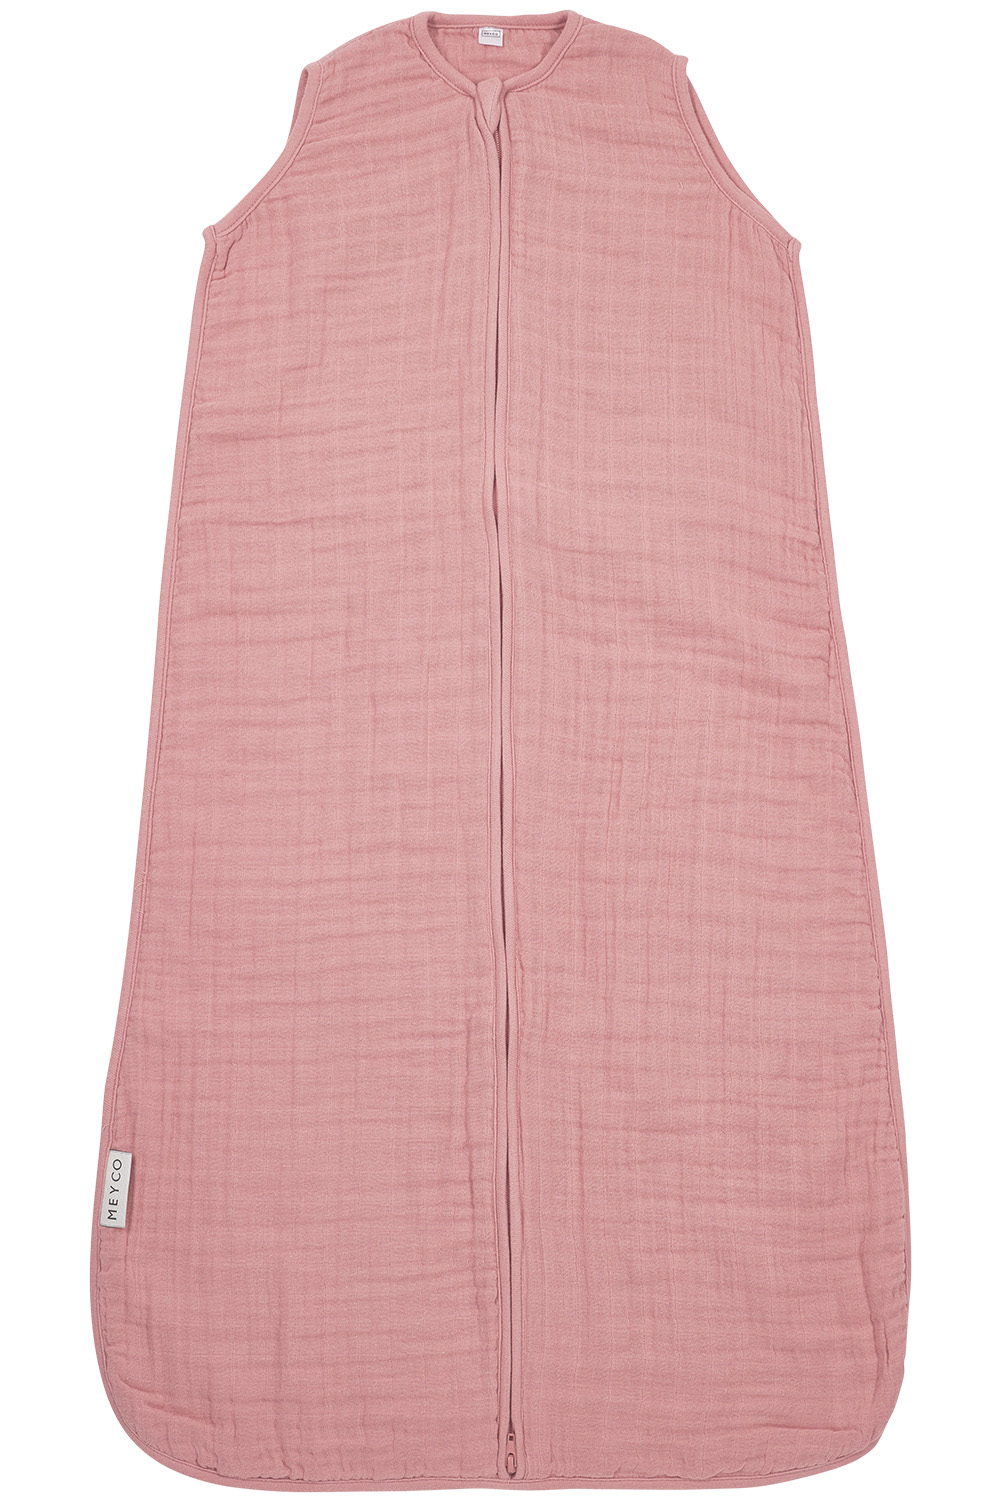 Schlafsack pre-washed musselin Uni - old pink - 90cm